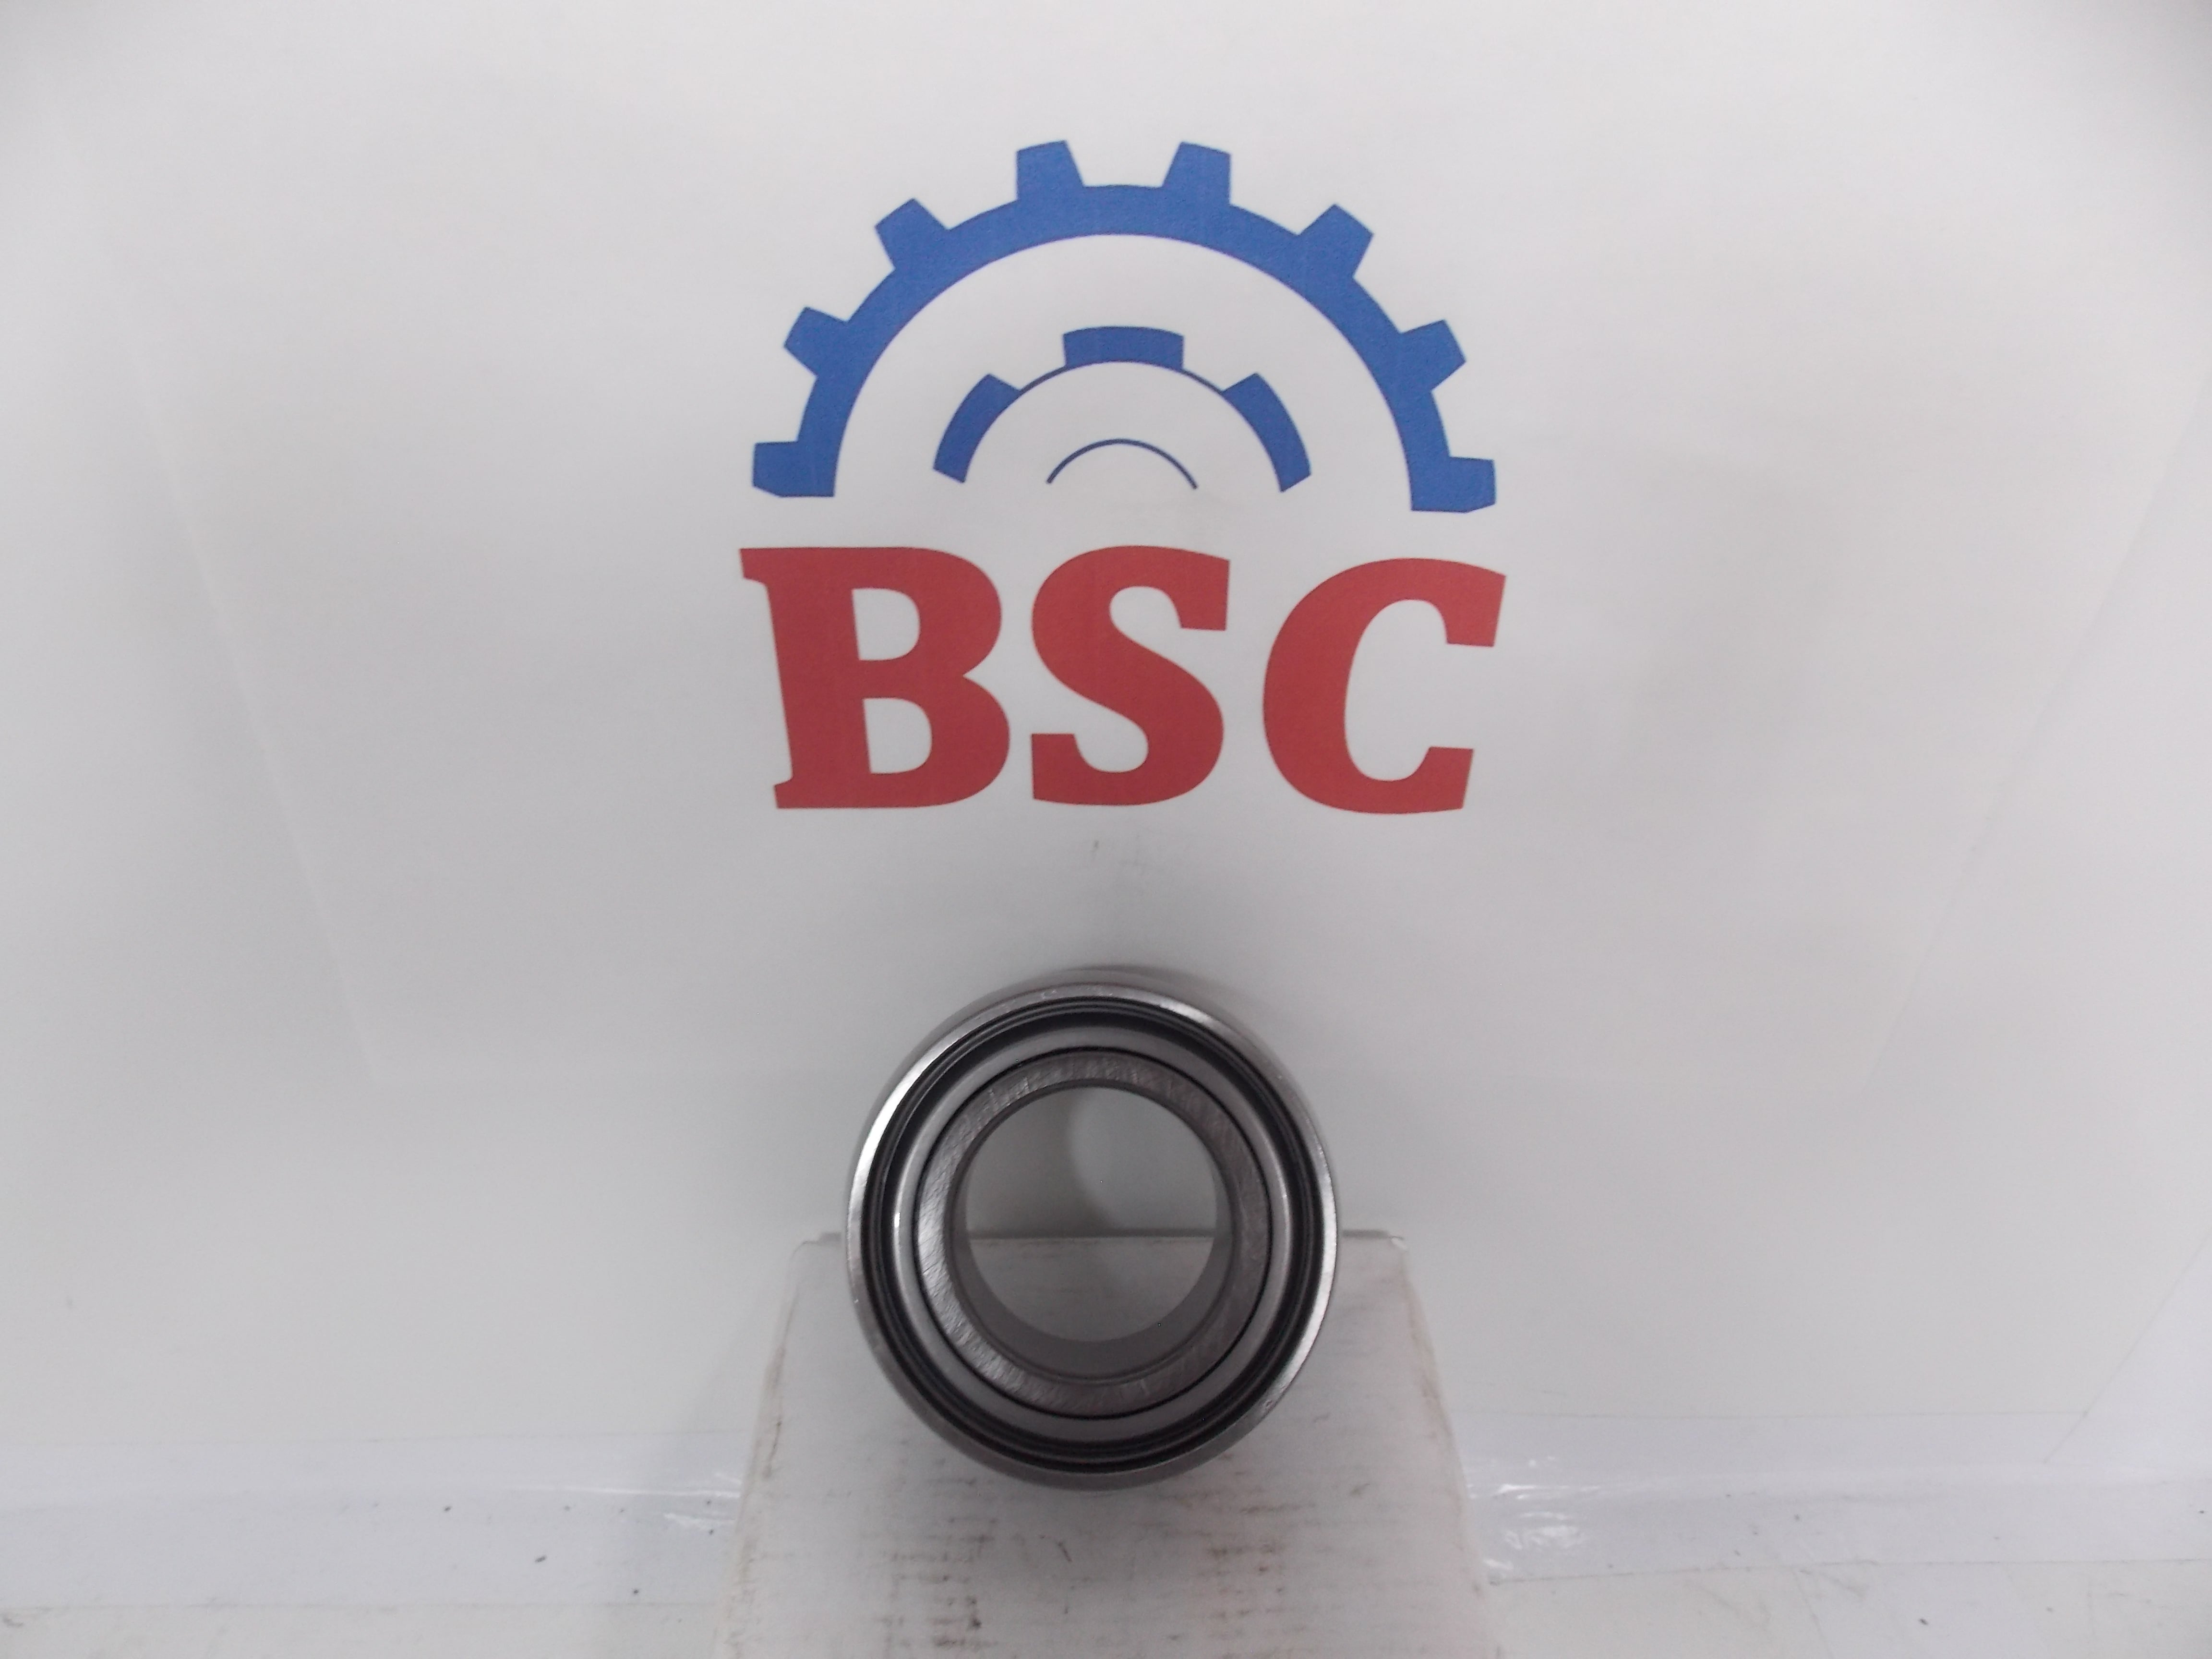 203KRR3 Special AG Bearing Round Bore